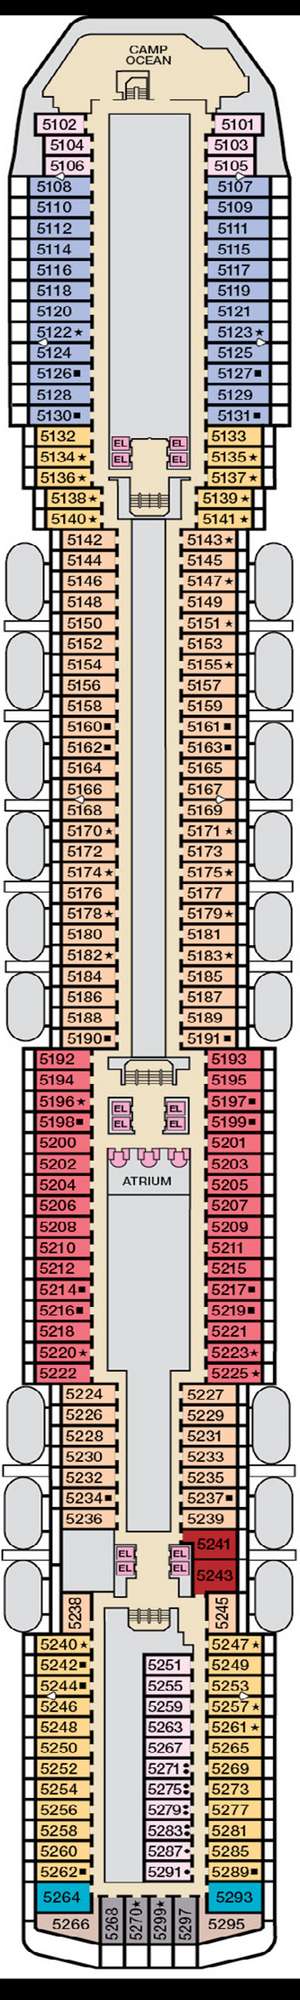 Deck plan for Carnival Miracle